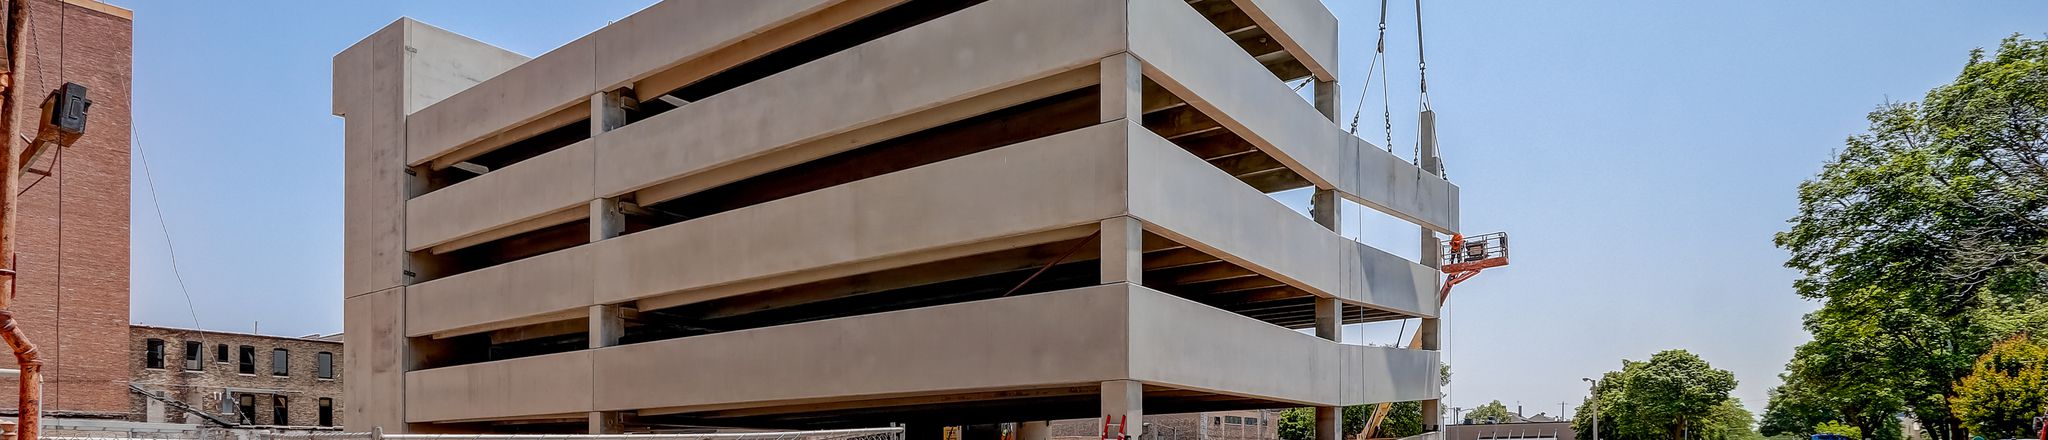 street view image of thriveon parking deck in construction